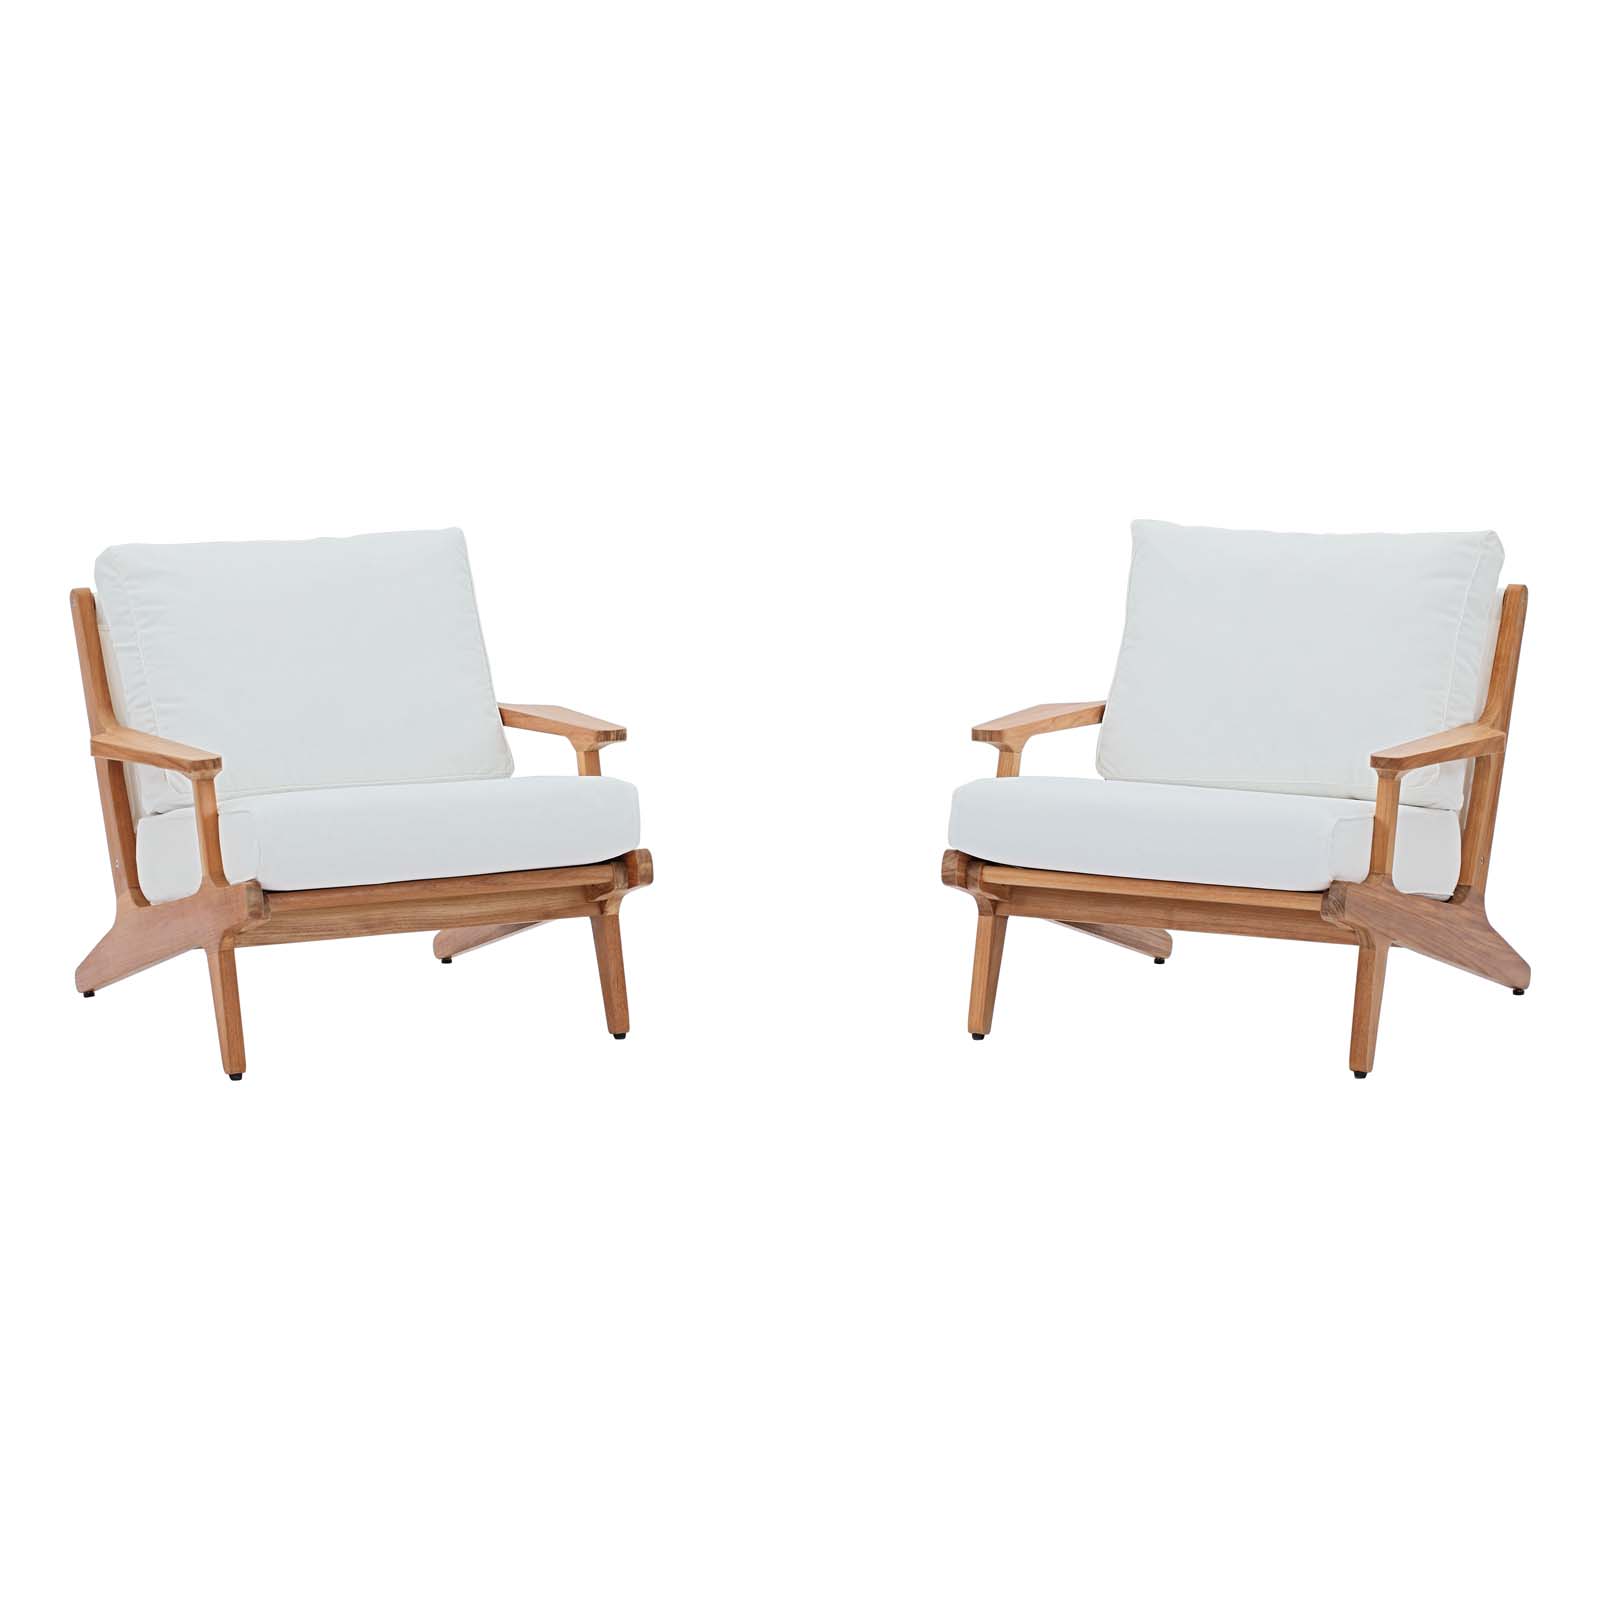 Modern Contemporary Urban Design Outdoor Patio Balcony Garden Furniture Lounge Chair Set, Set of Two, Wood, White Natural - image 1 of 5